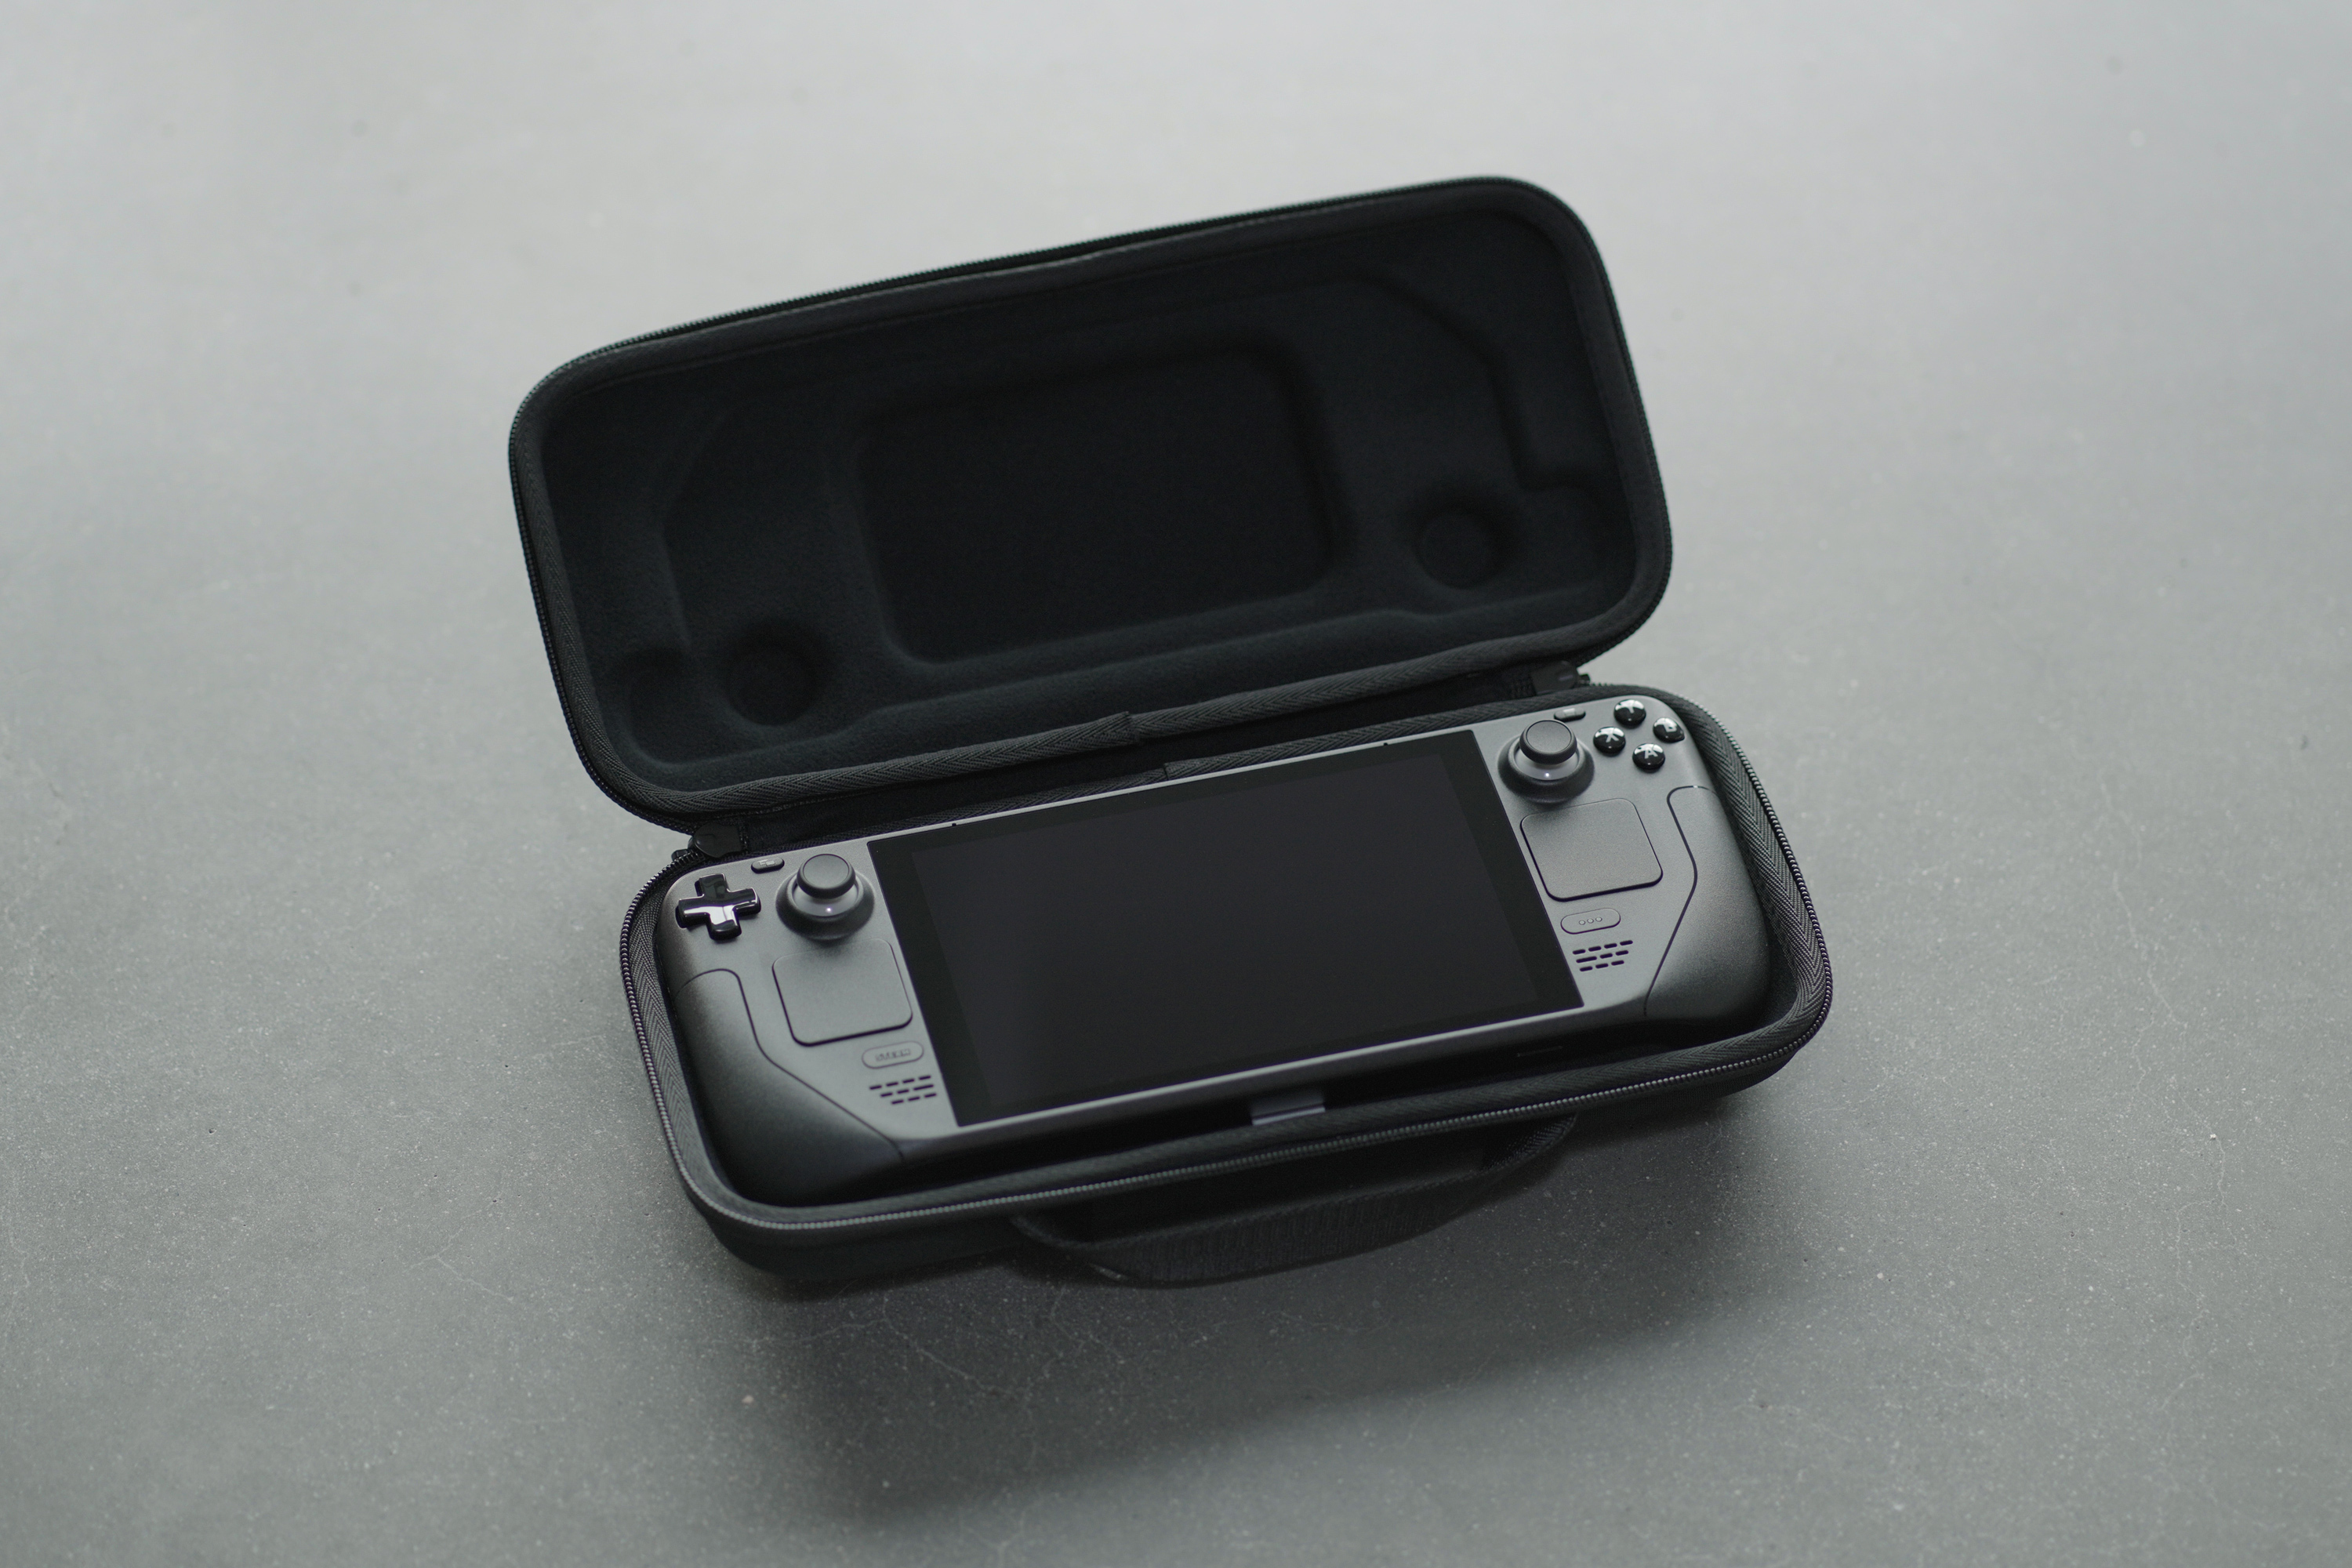 Valve shows off final packaging, carrying case for the Steam Deck